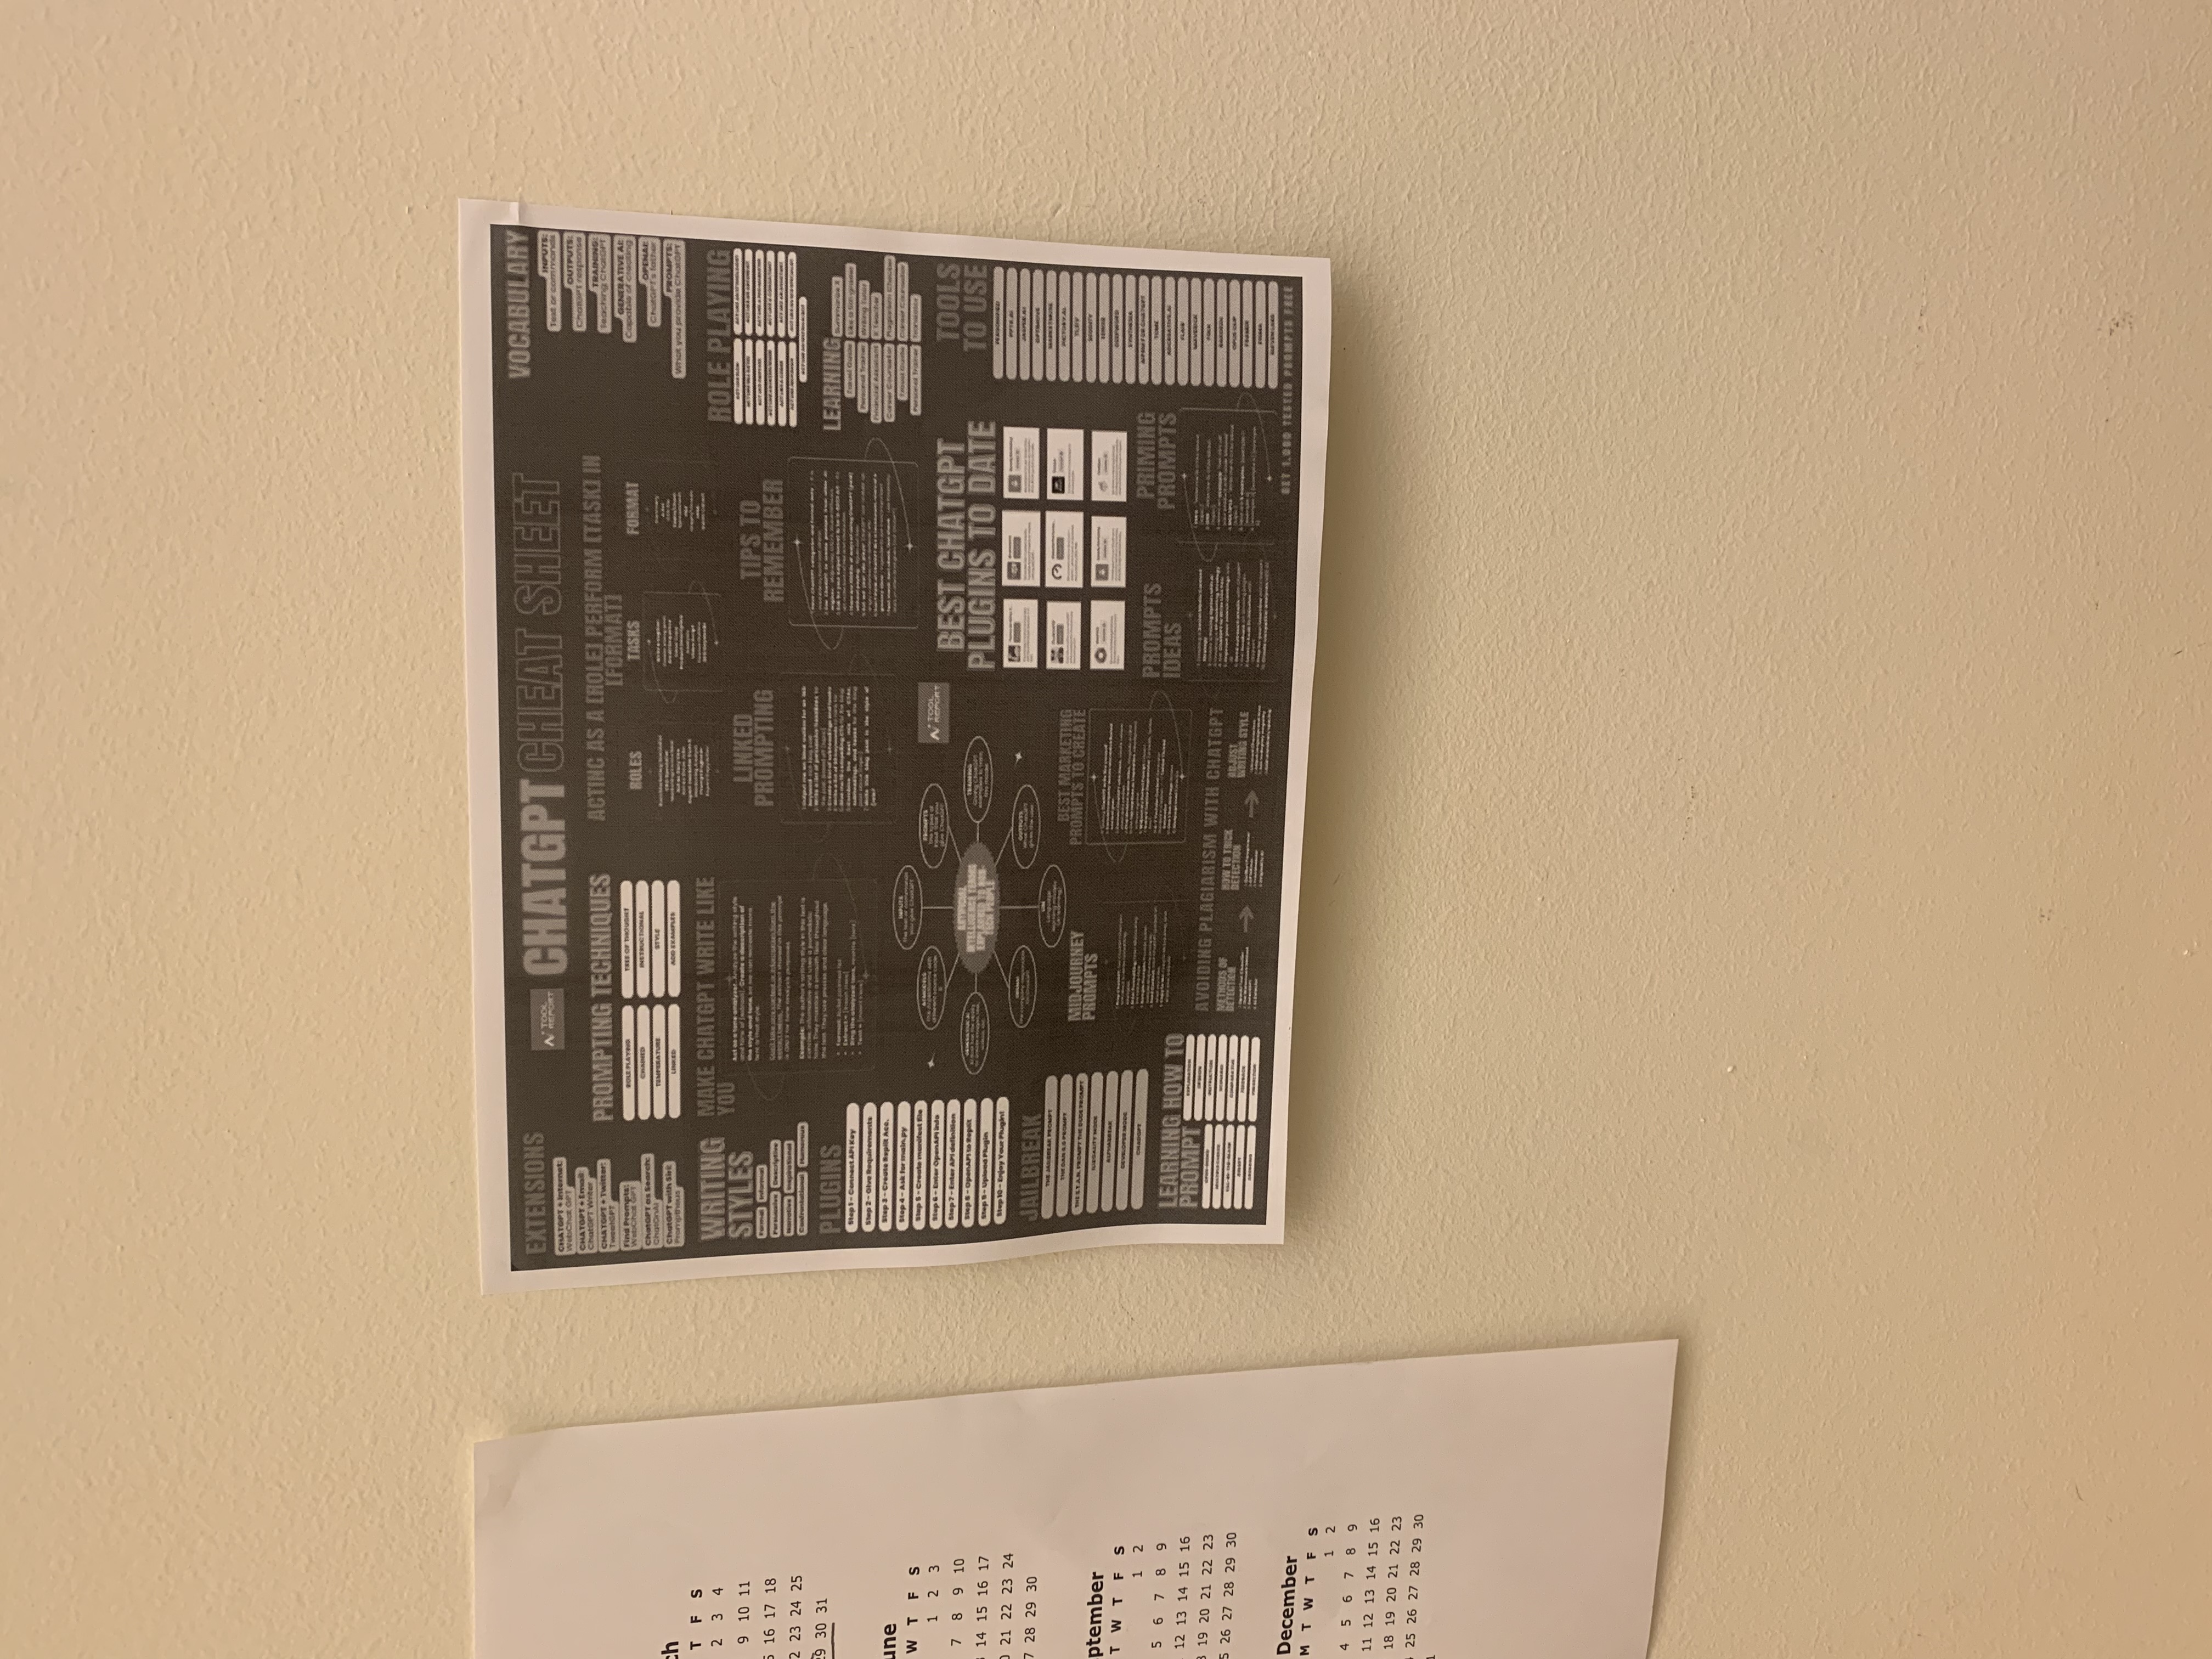 A picture of my wall showing my calendar next to the ChatGTP cheatsheet. Despite being printed out, the text is still too small to be legible.